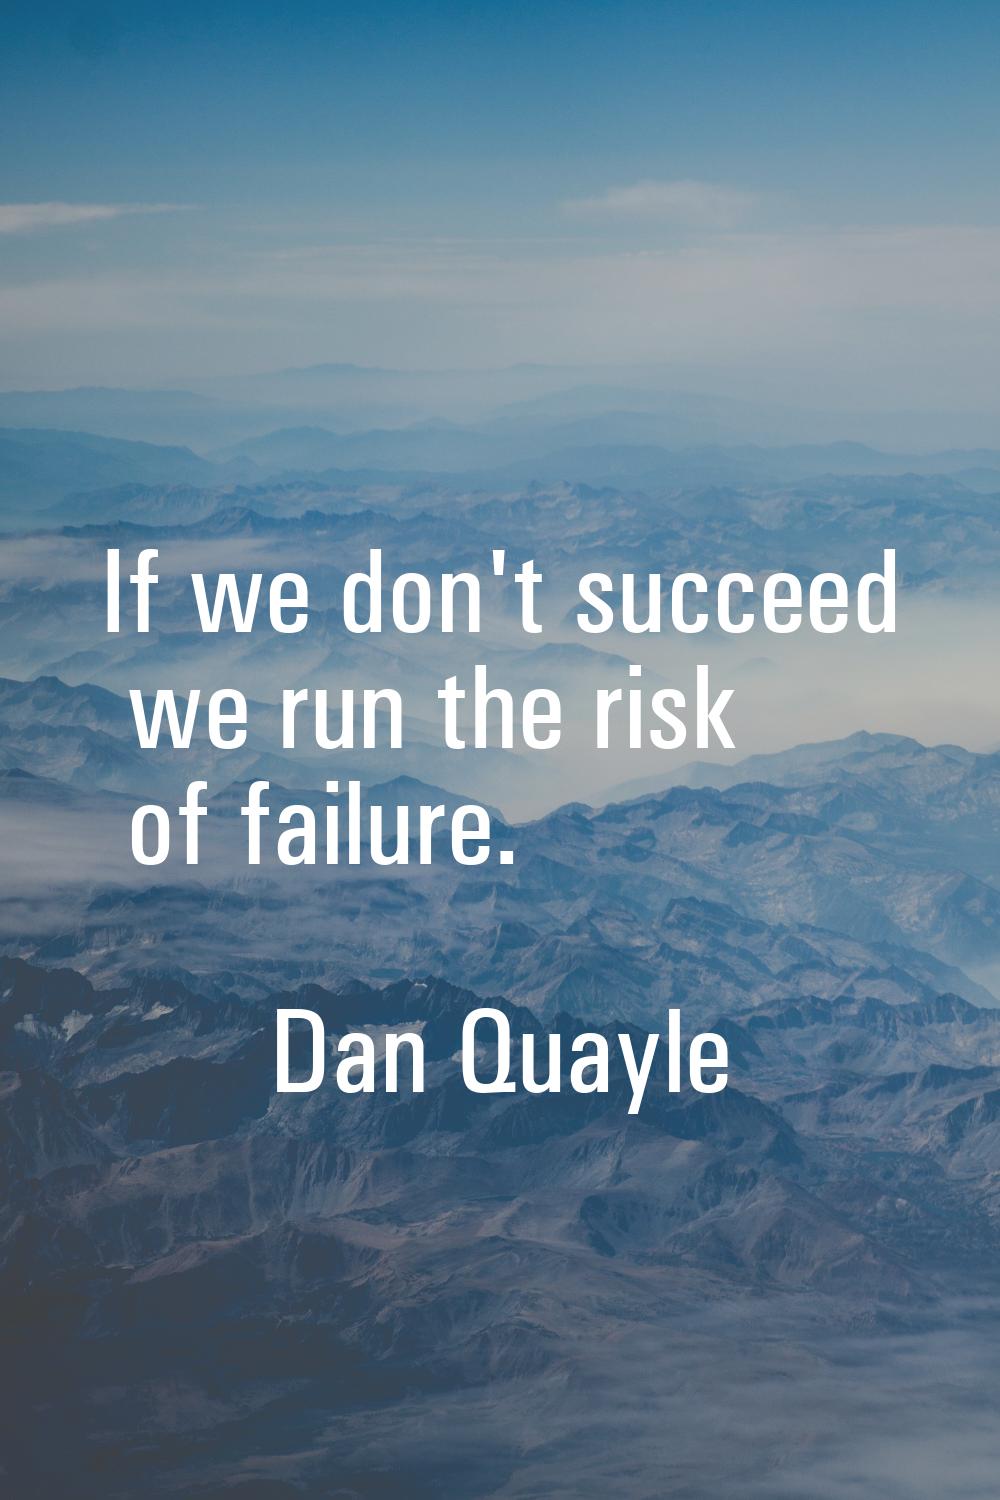 If we don't succeed we run the risk of failure.